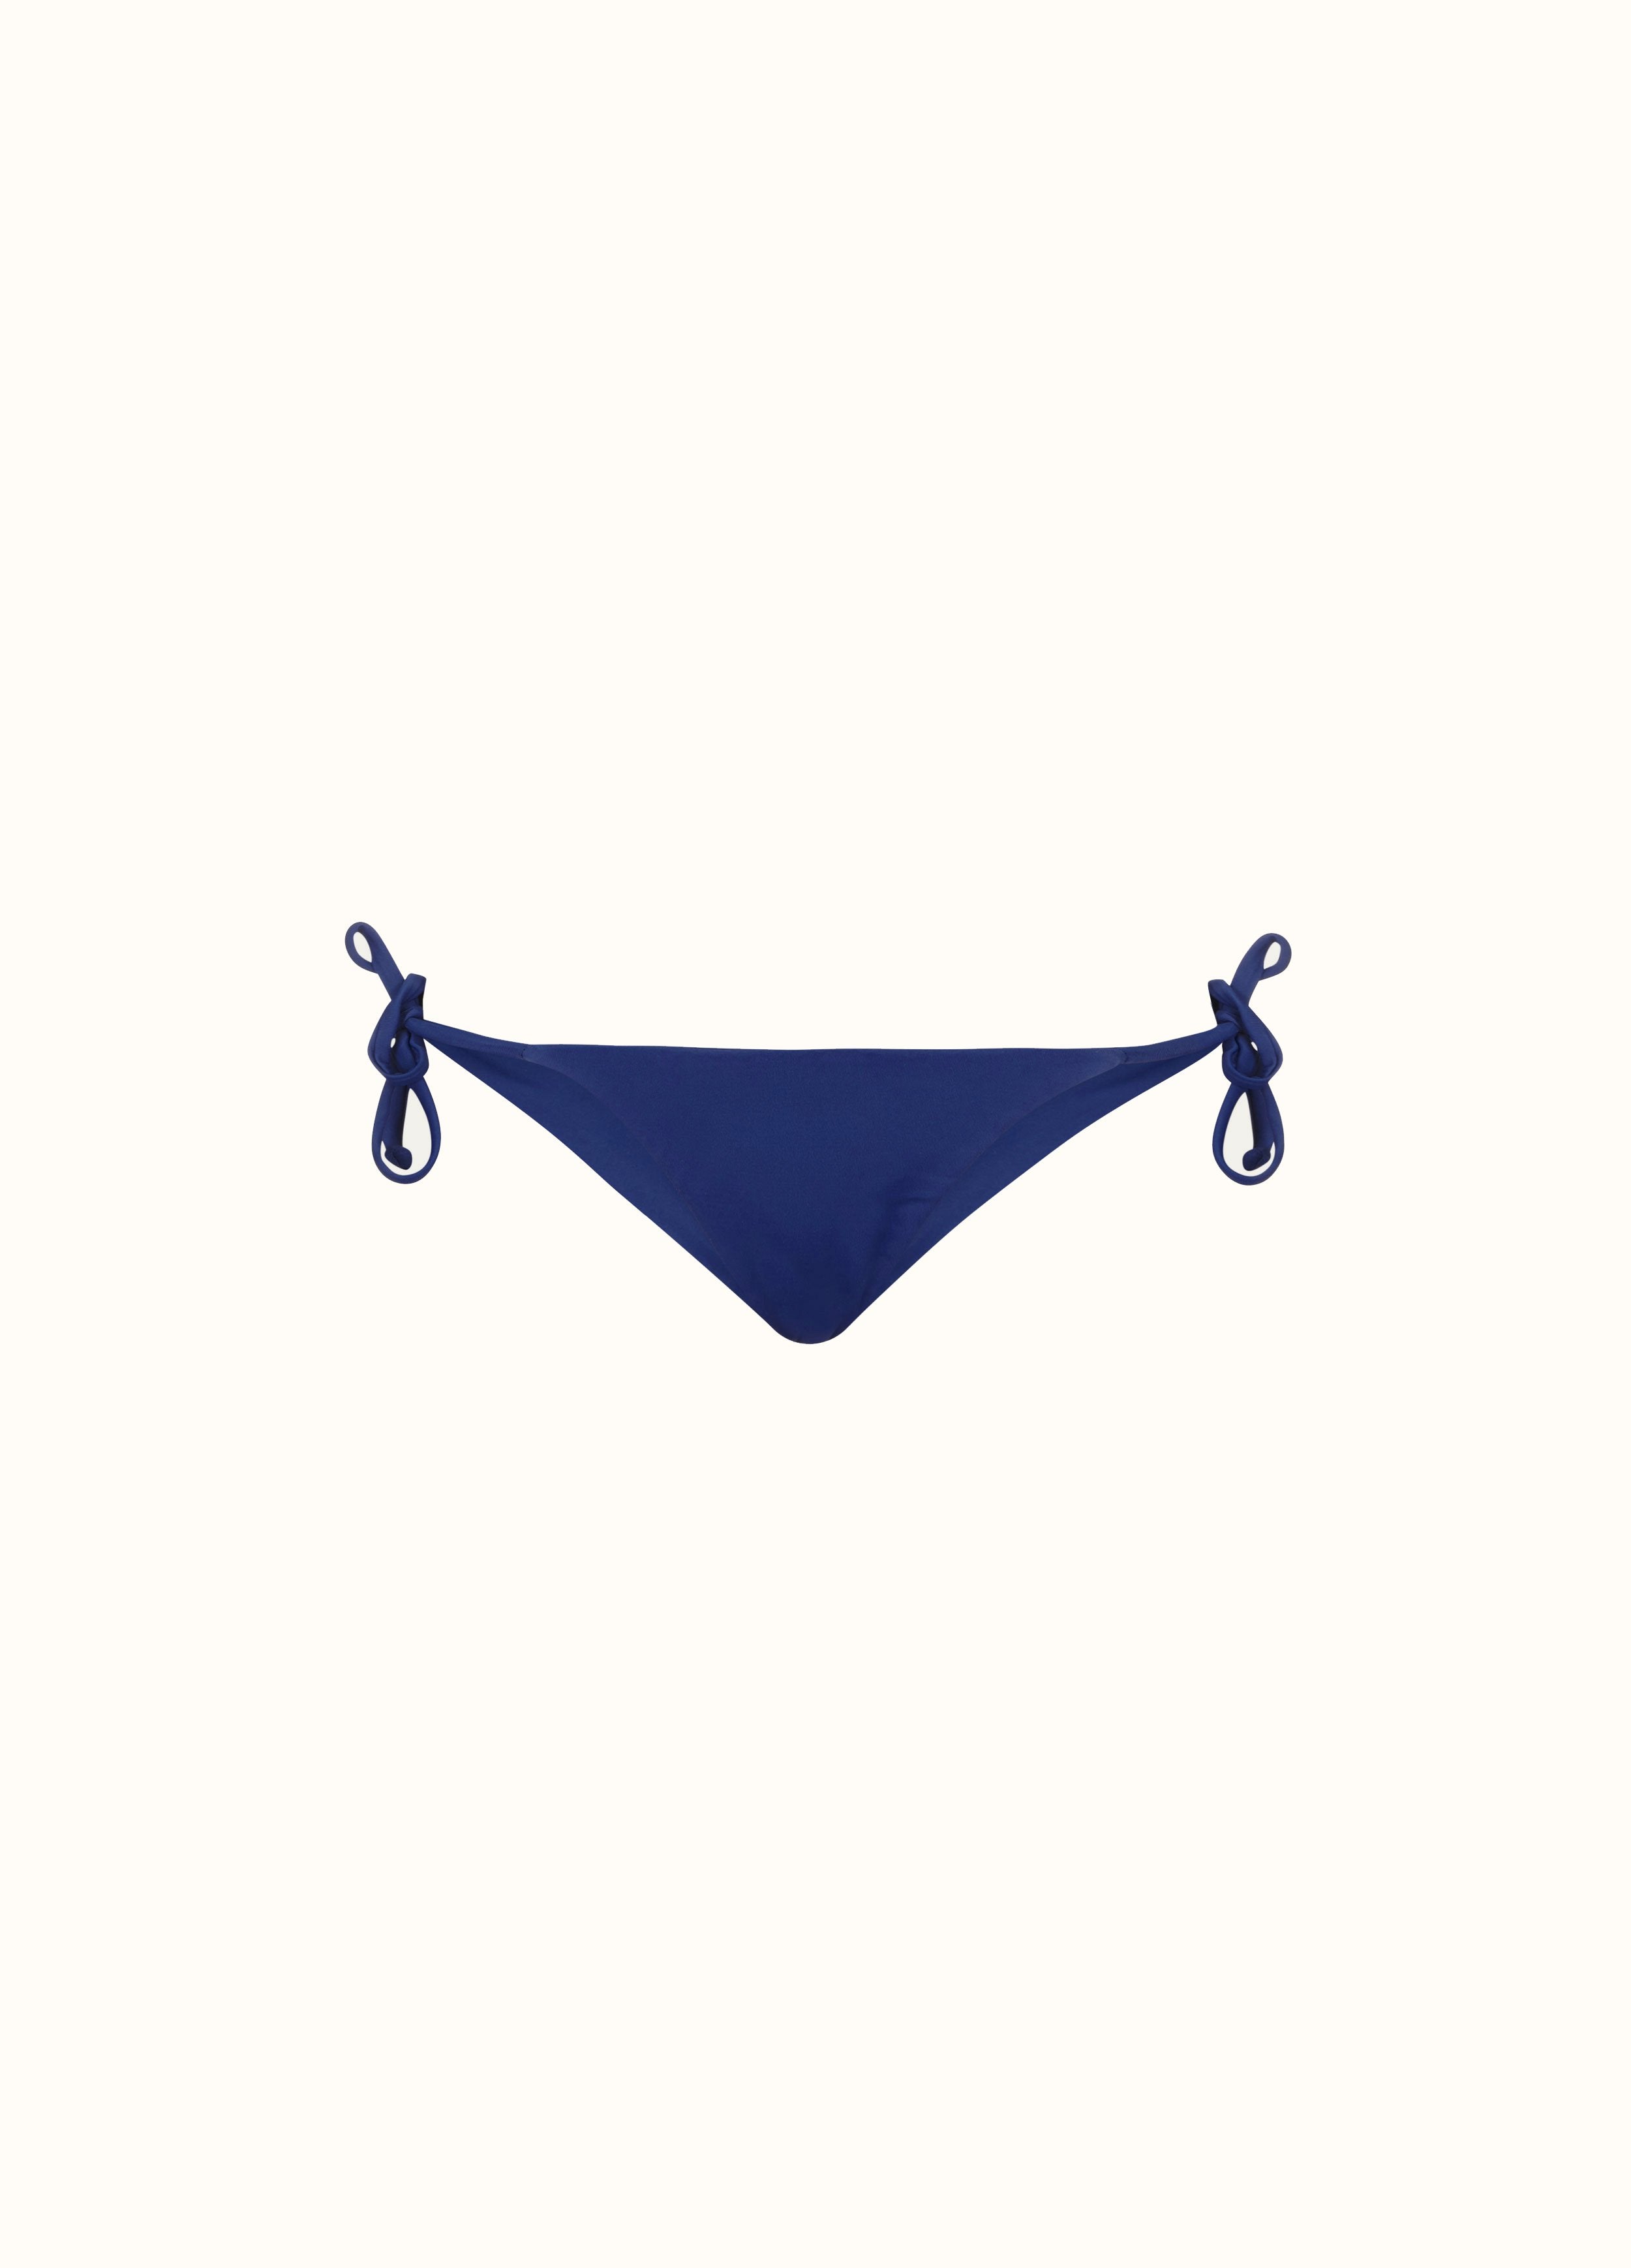 The Tie-Me-Up Brief - Matte Fabric